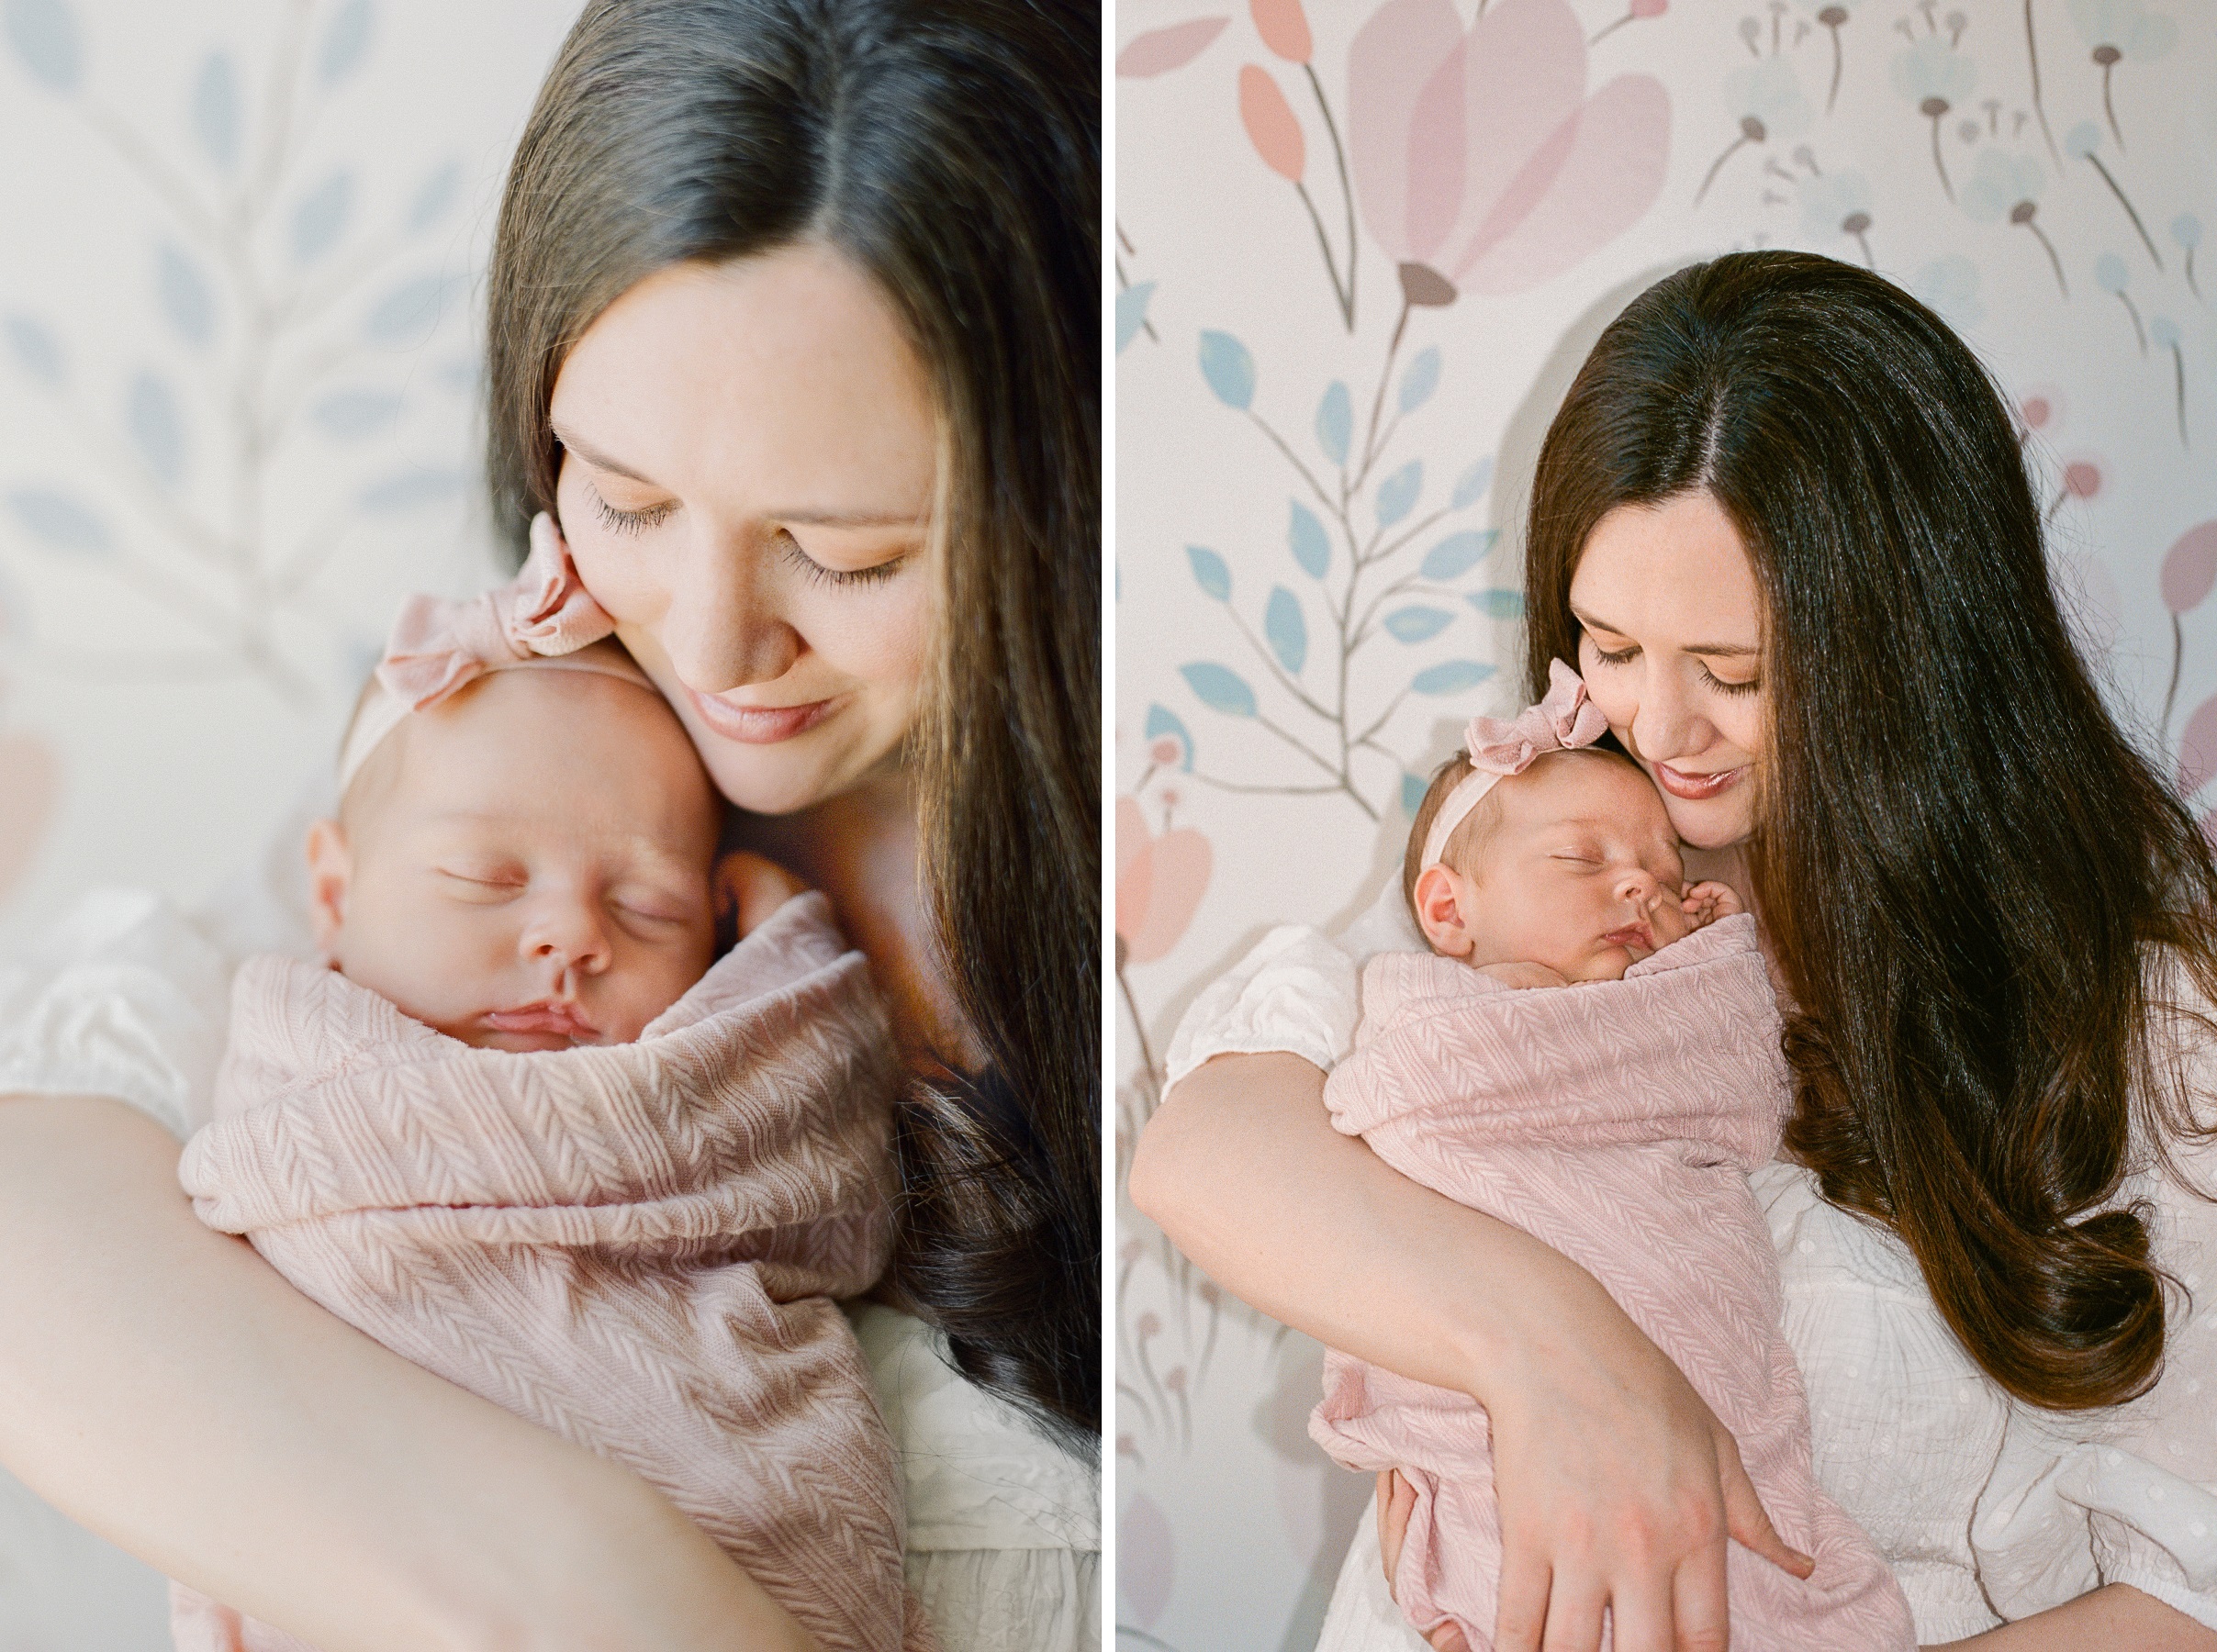 7 - Baby girl with mom in nursery during newborn session at home in Overland Park, Kansas